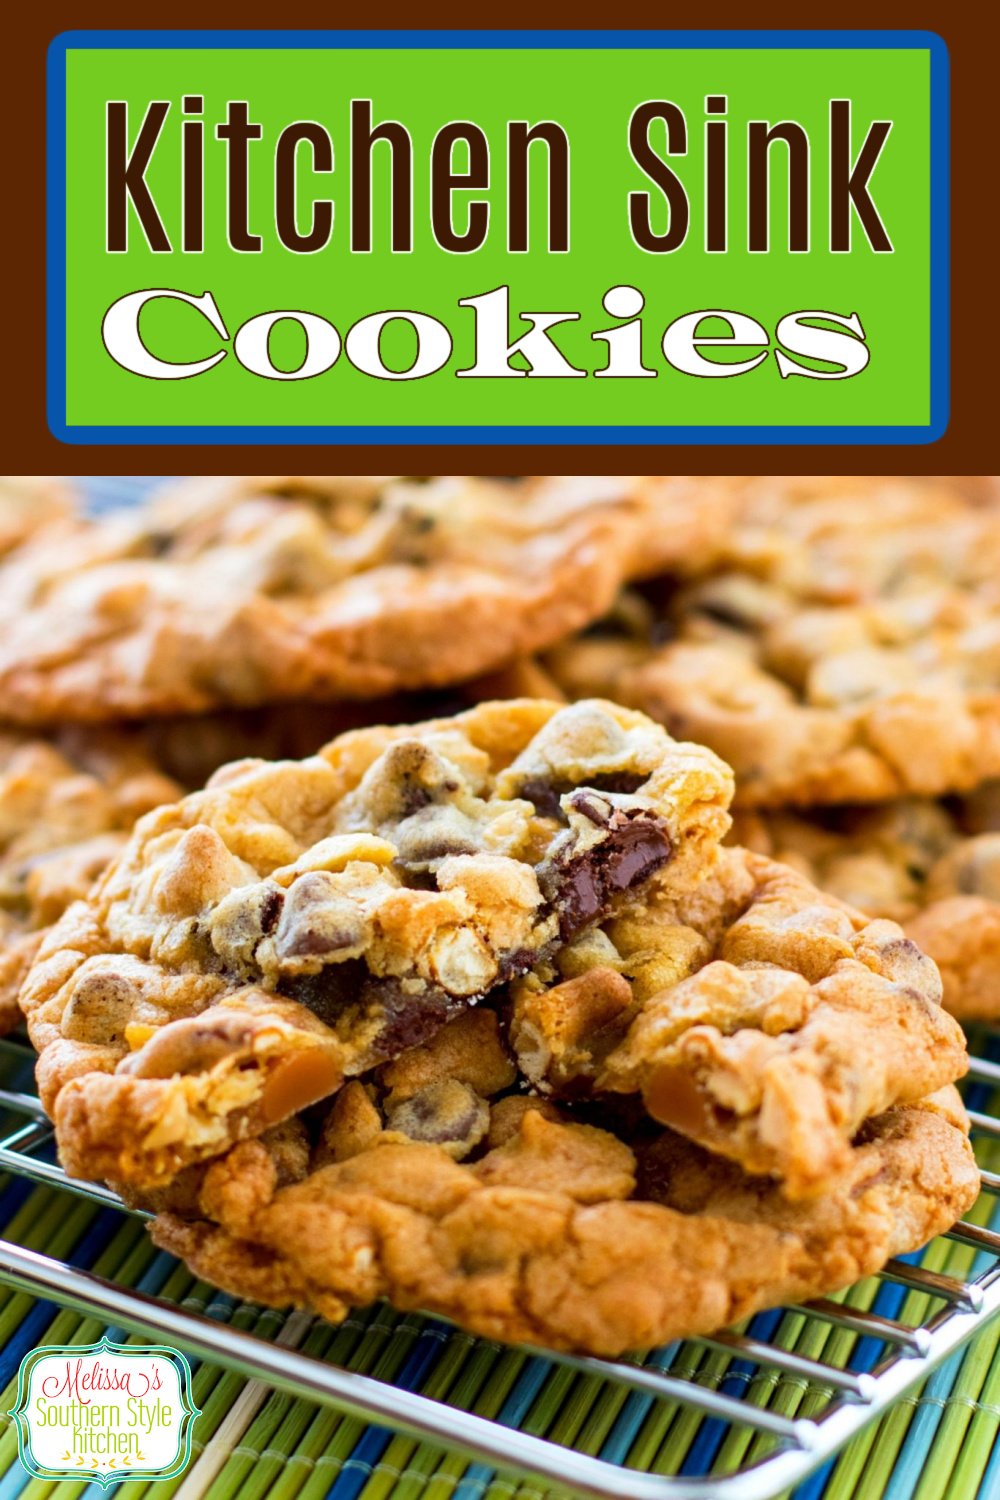 These sweet and salty Kitchen Sink Cookies are fully loaded with chocolate and peanut butter chips, peanuts, caramel bits and pretzels #kitchensinkcookies #cookies #cookierecipes #chocolatechipcookies #sweets #christmascookies #holidaybaking #holidays #desserts #dessertfoodrecipes #southernfood #southernrecipes via @melissasssk